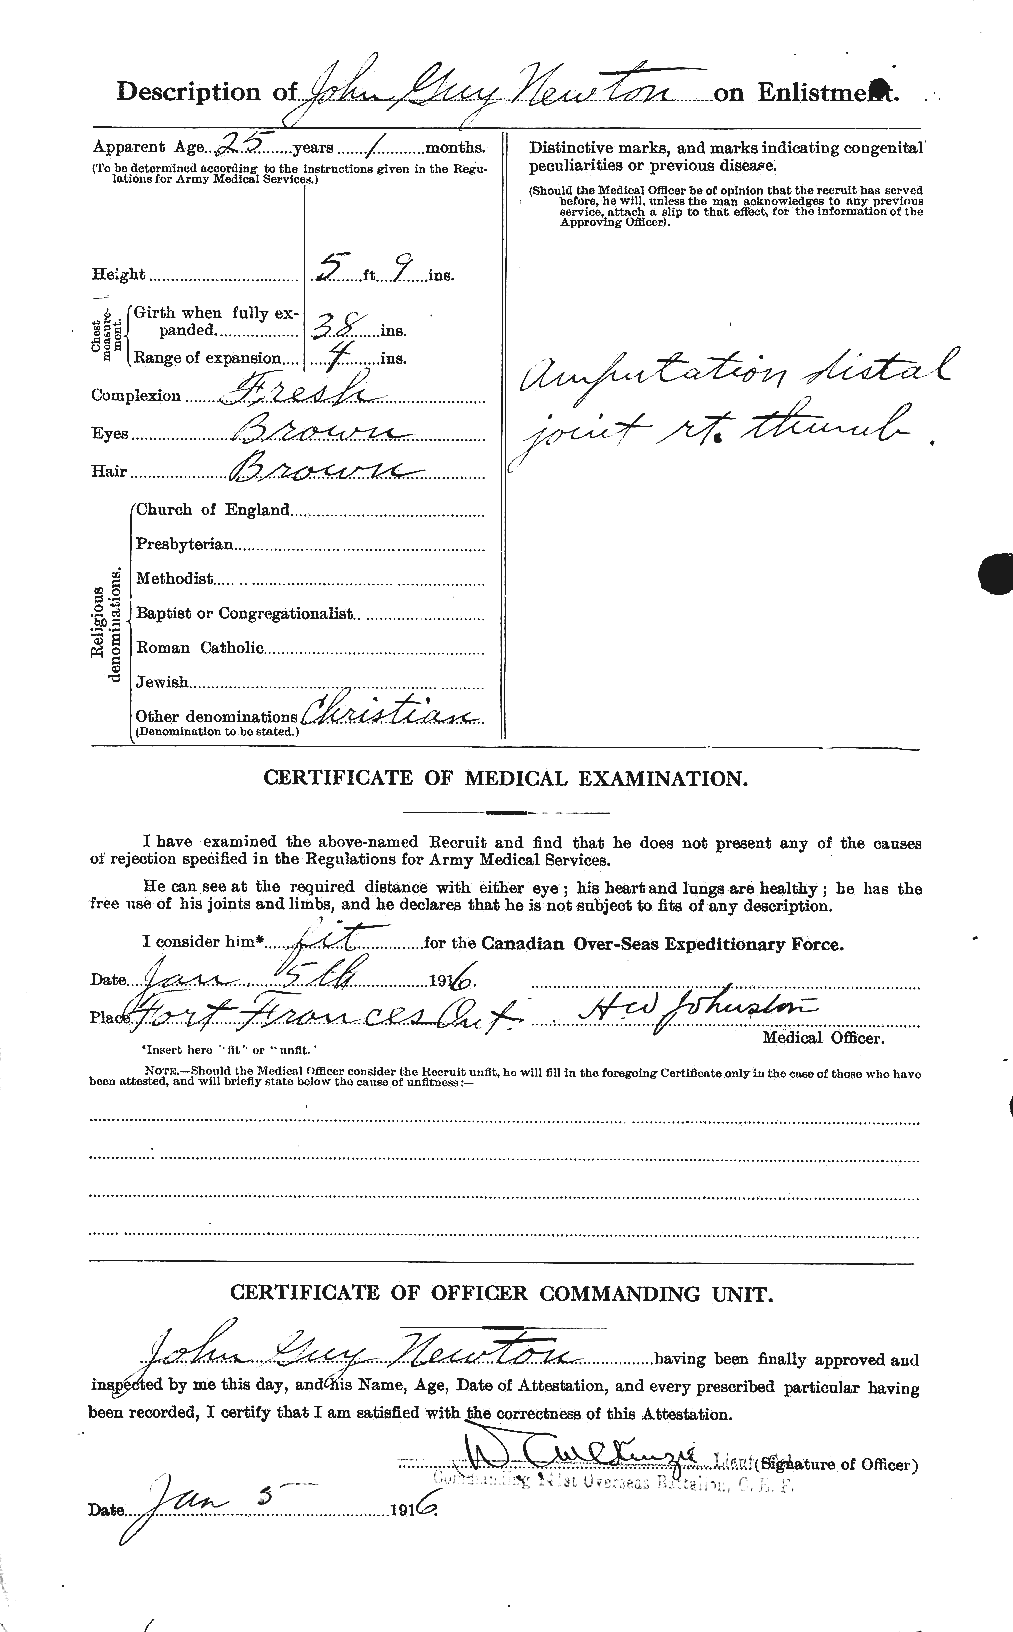 Personnel Records of the First World War - CEF 555958b